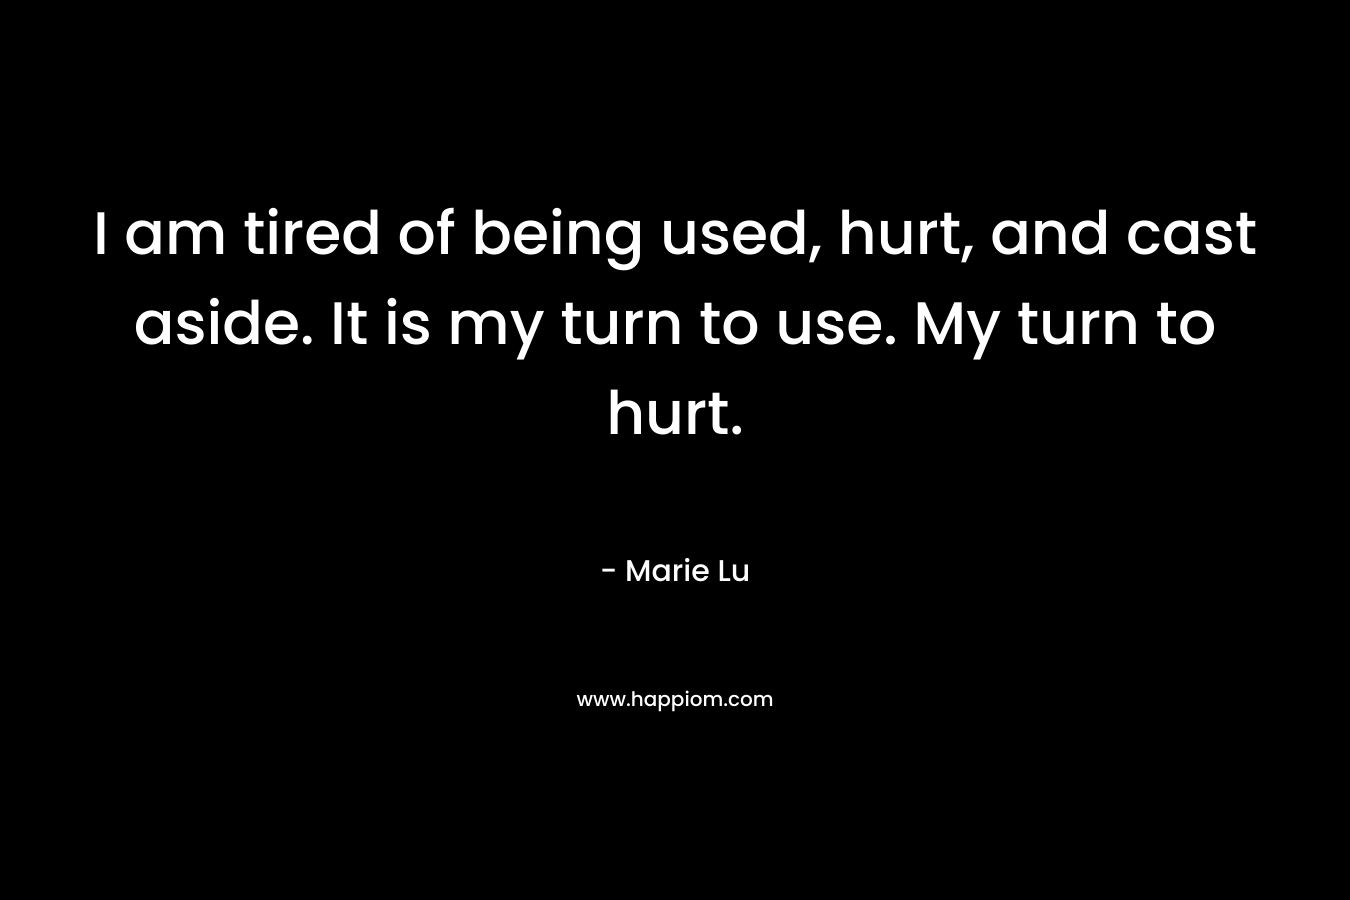 I am tired of being used, hurt, and cast aside. It is my turn to use. My turn to hurt. – Marie Lu